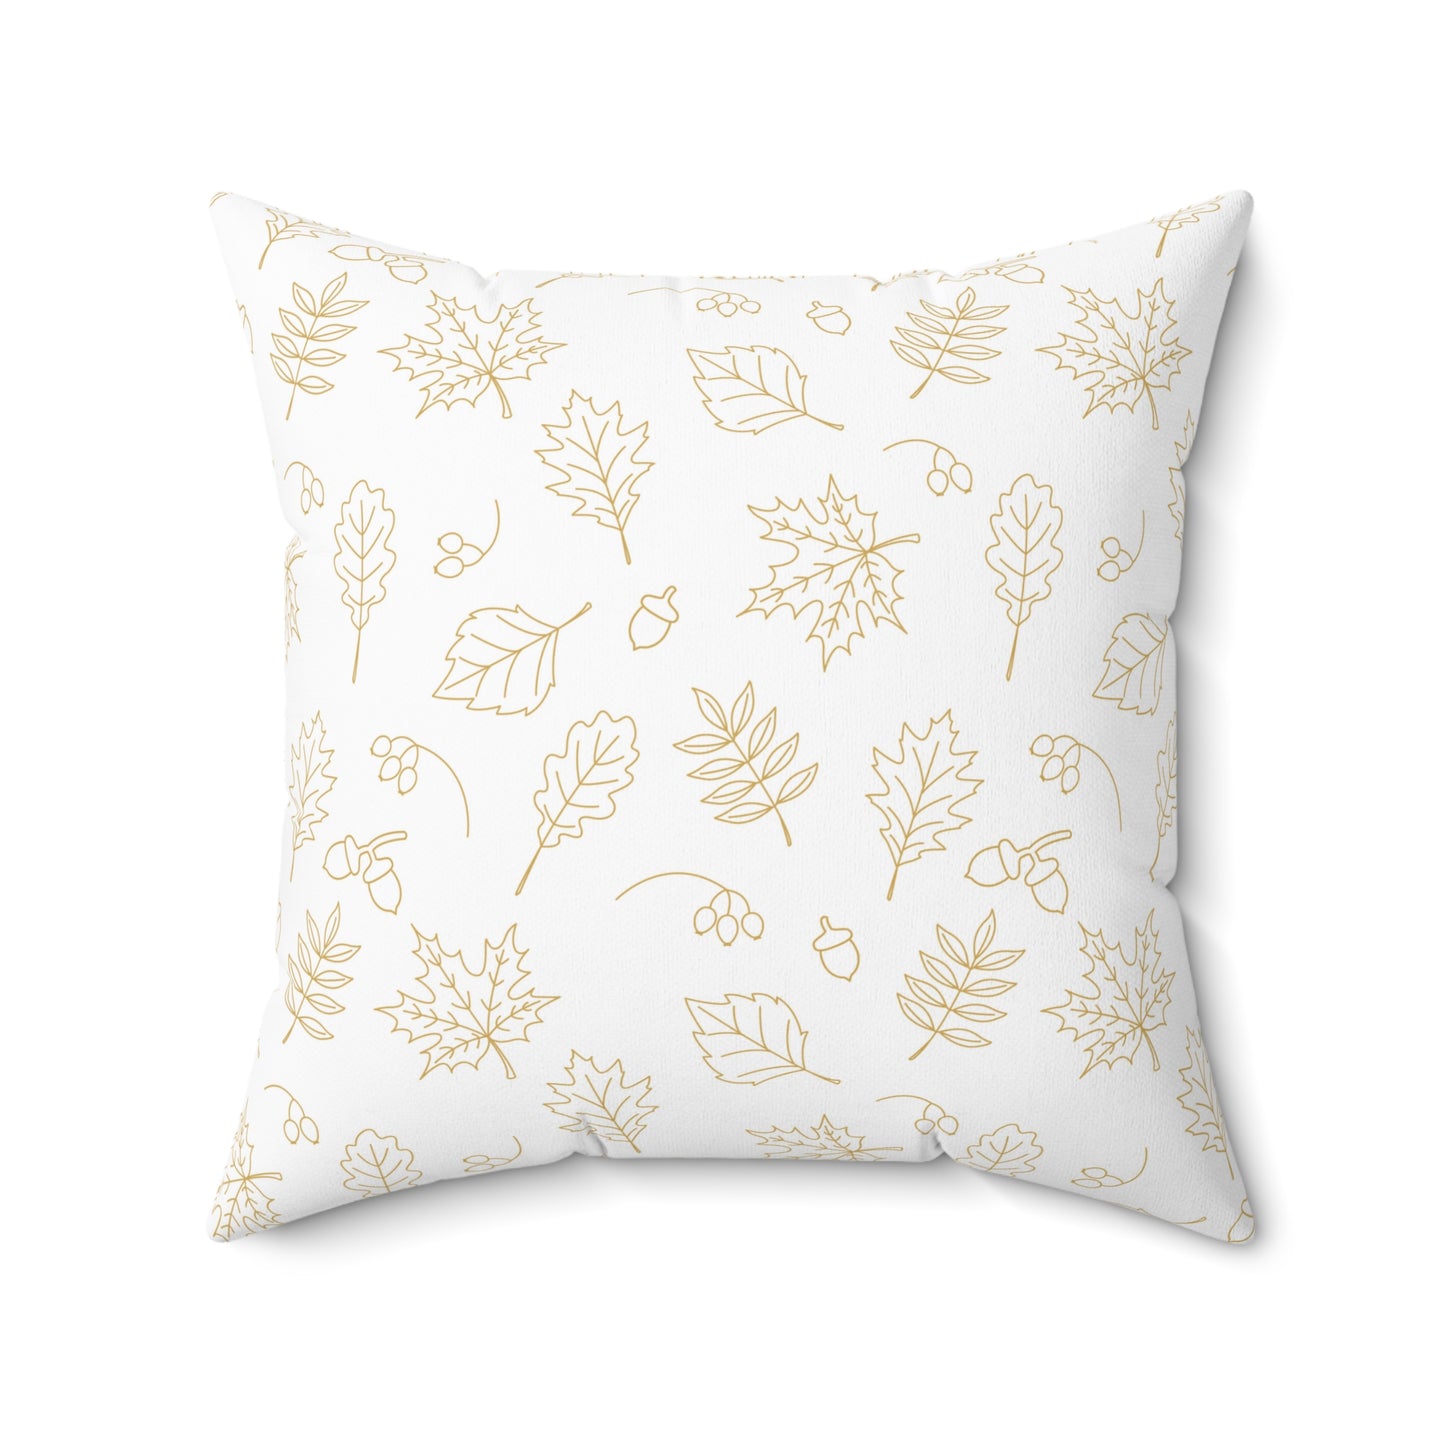 Acorns and Leaves Spun Polyester Square Pillow